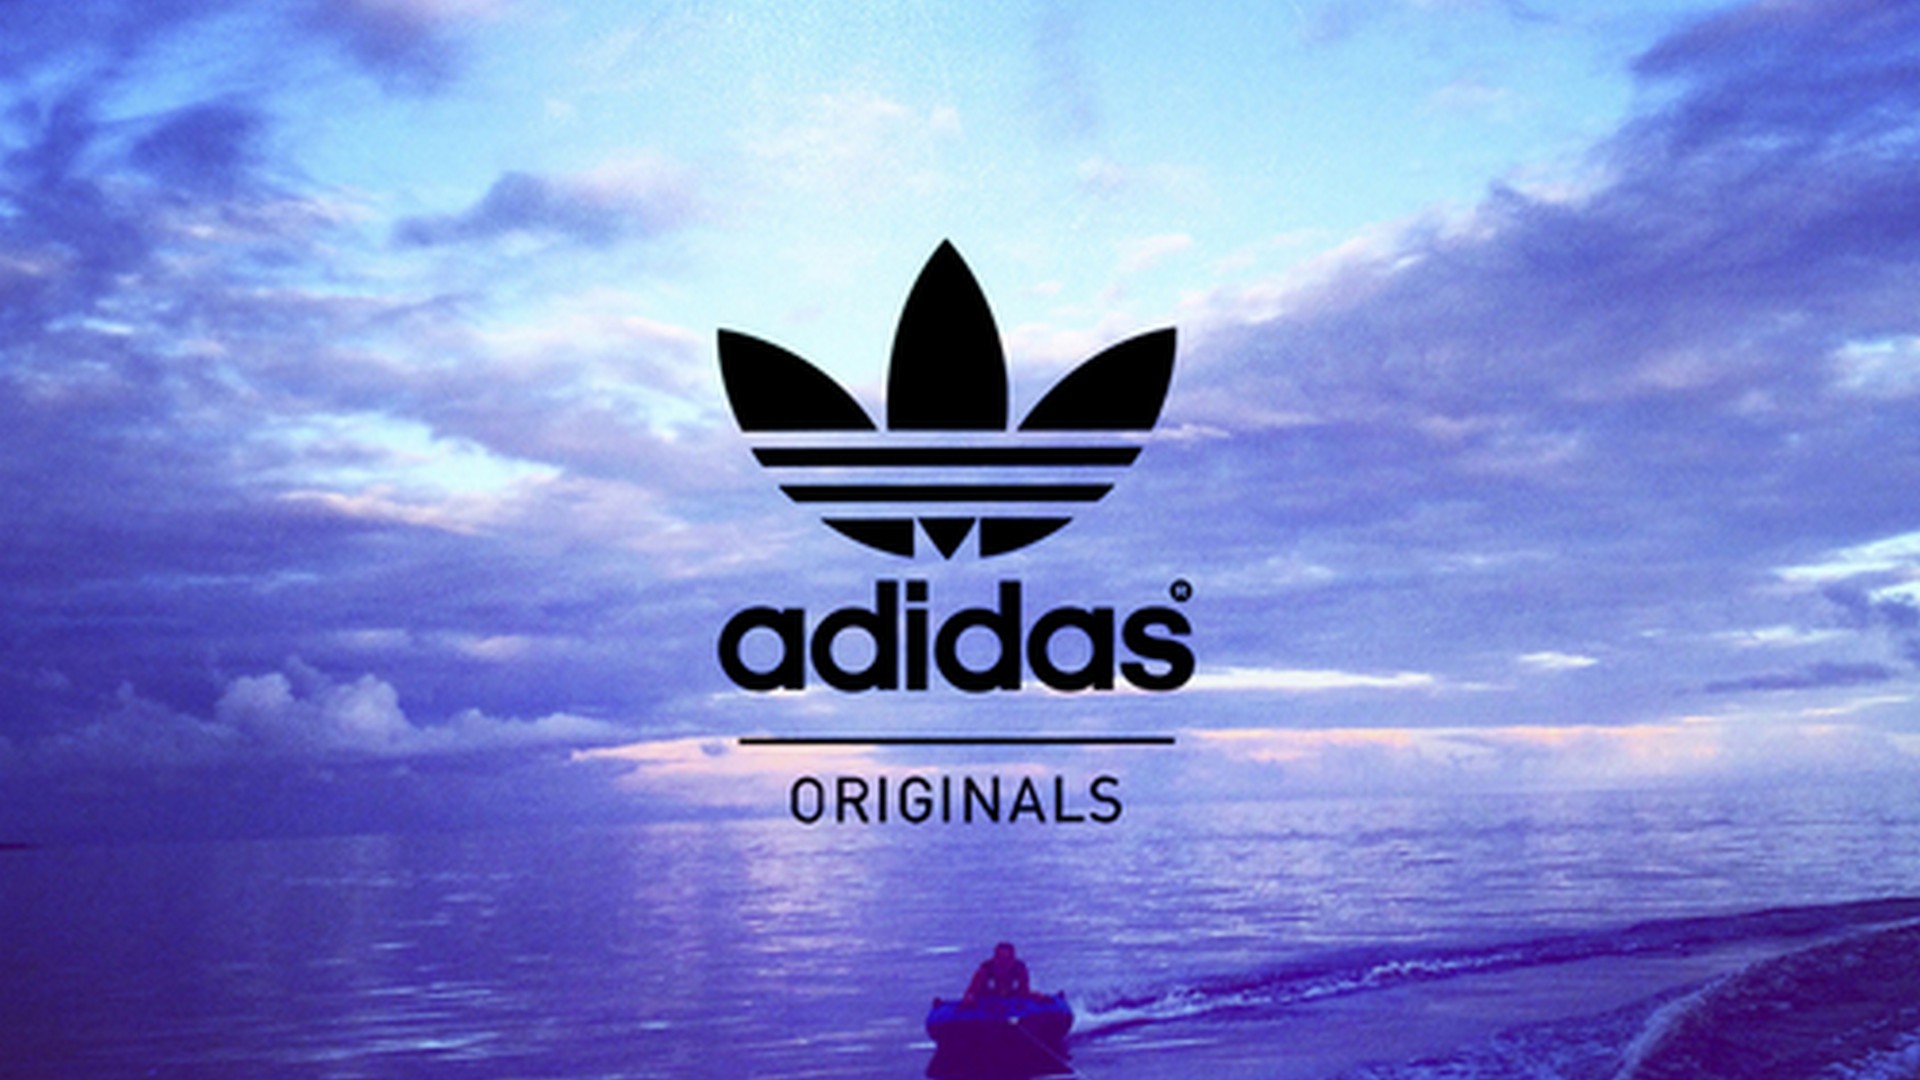 Adidas wallpapers top best adidas backgrounds download